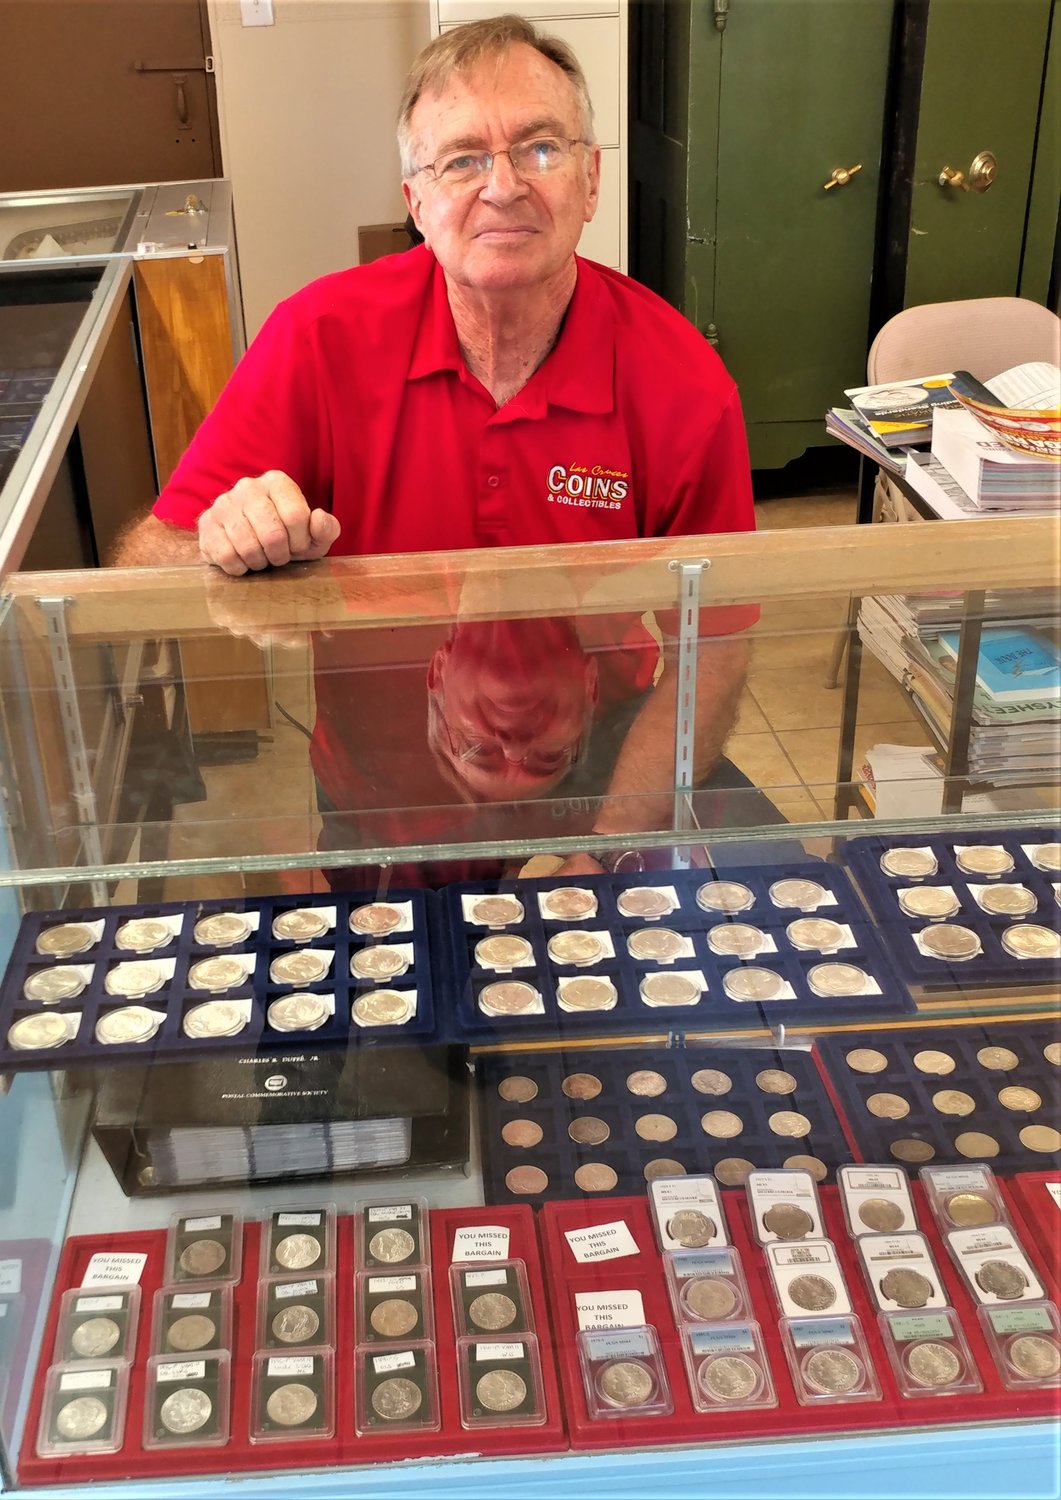 Las Cruces Coins and Collectibles co-owner Gary Henderson with some of what the store has available to collectors and investors.